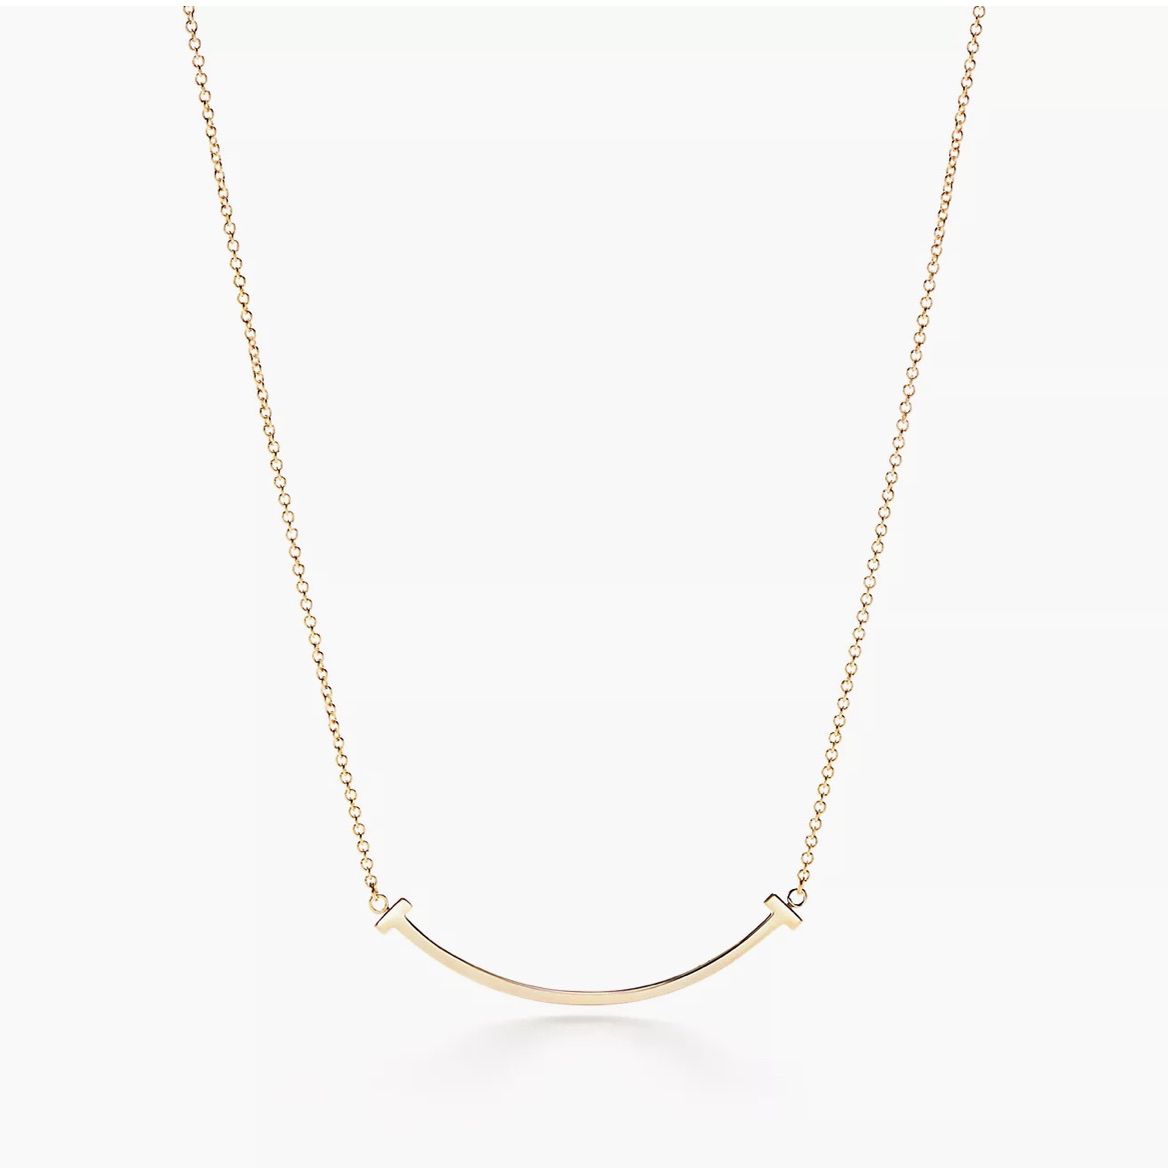 Tiffany & Co. Smile Necklace, Gold